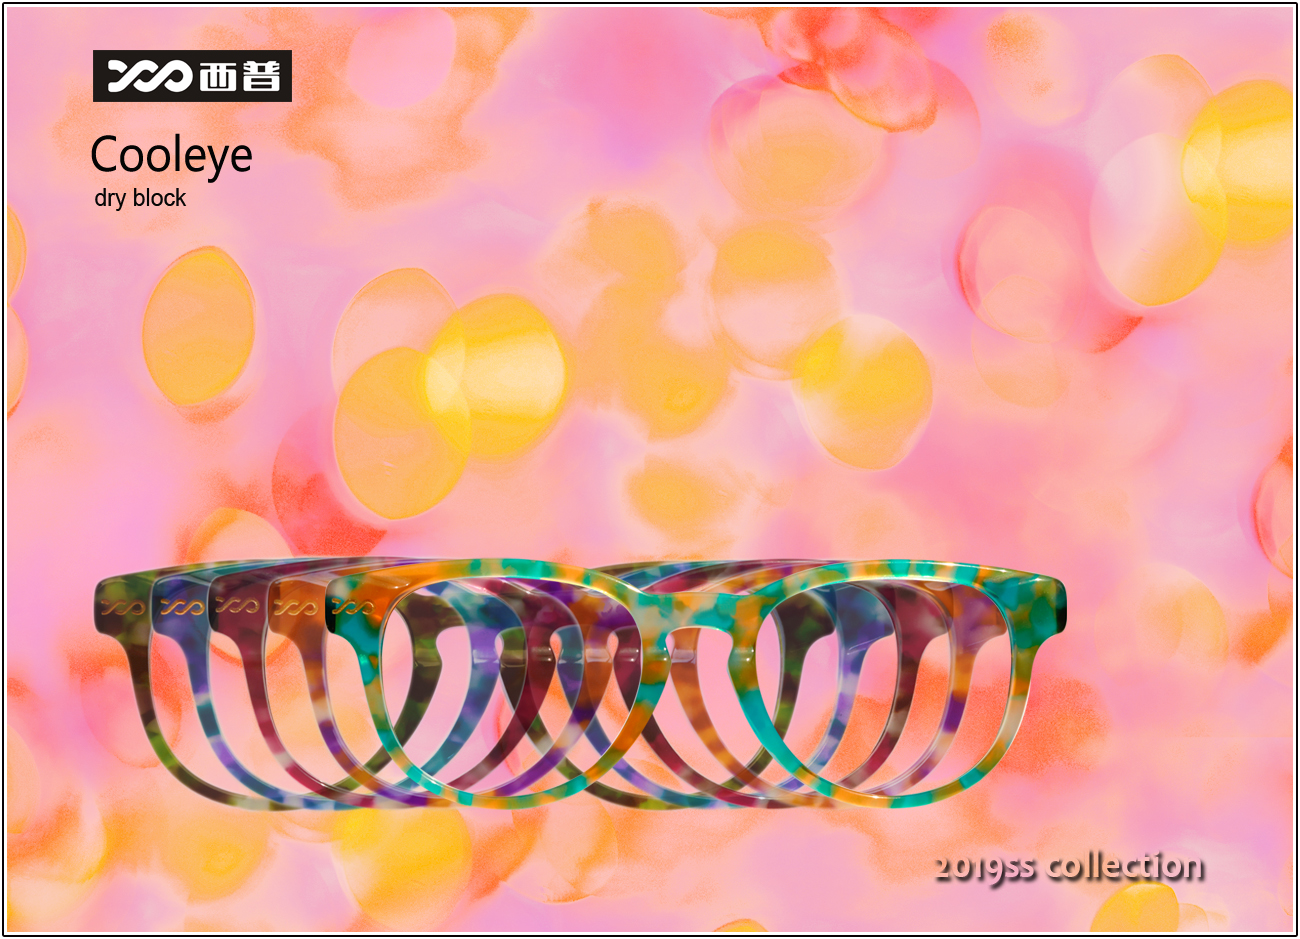 2019SS collection of cooleye